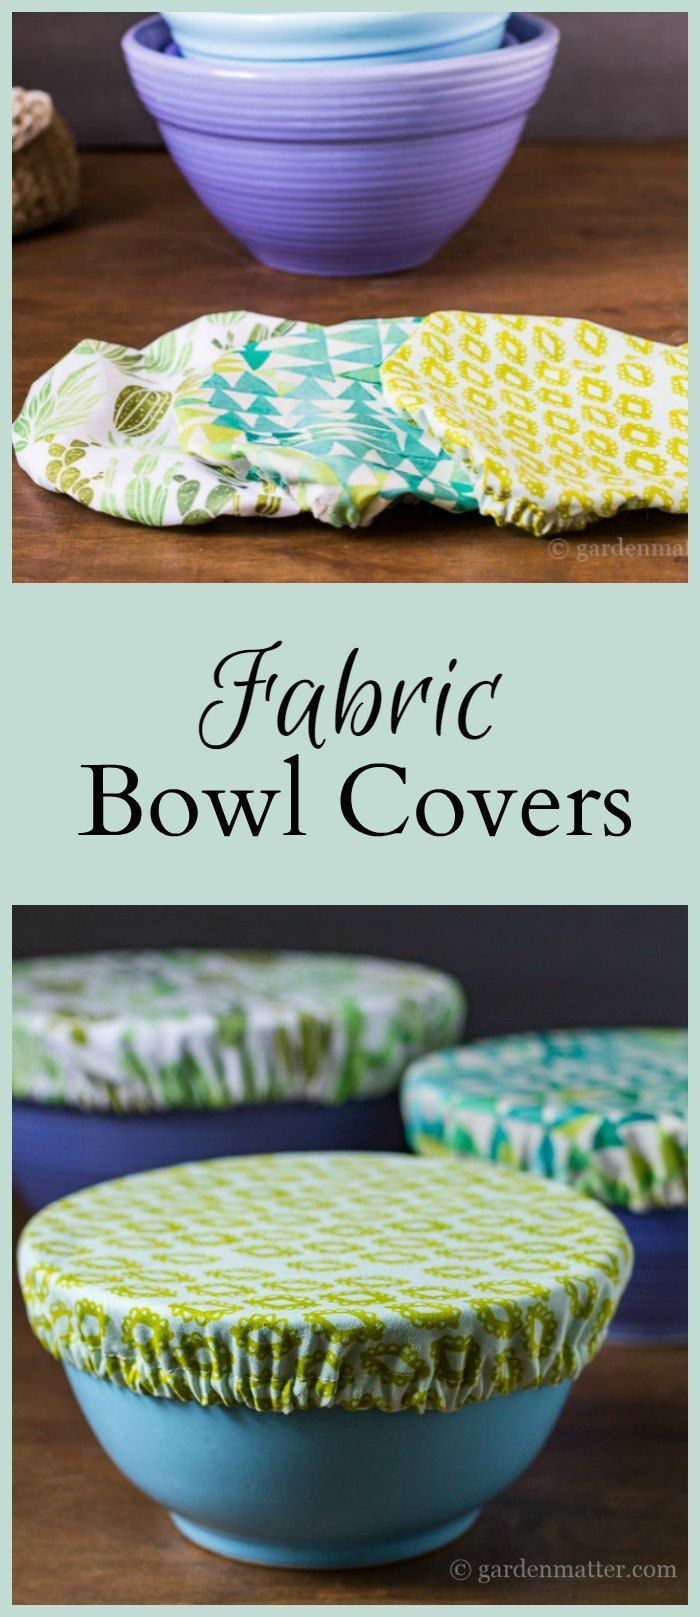 Learn how to make pretty fabric bowl covers to protect your food as an alternative to plastic wrap. A great housewarming present